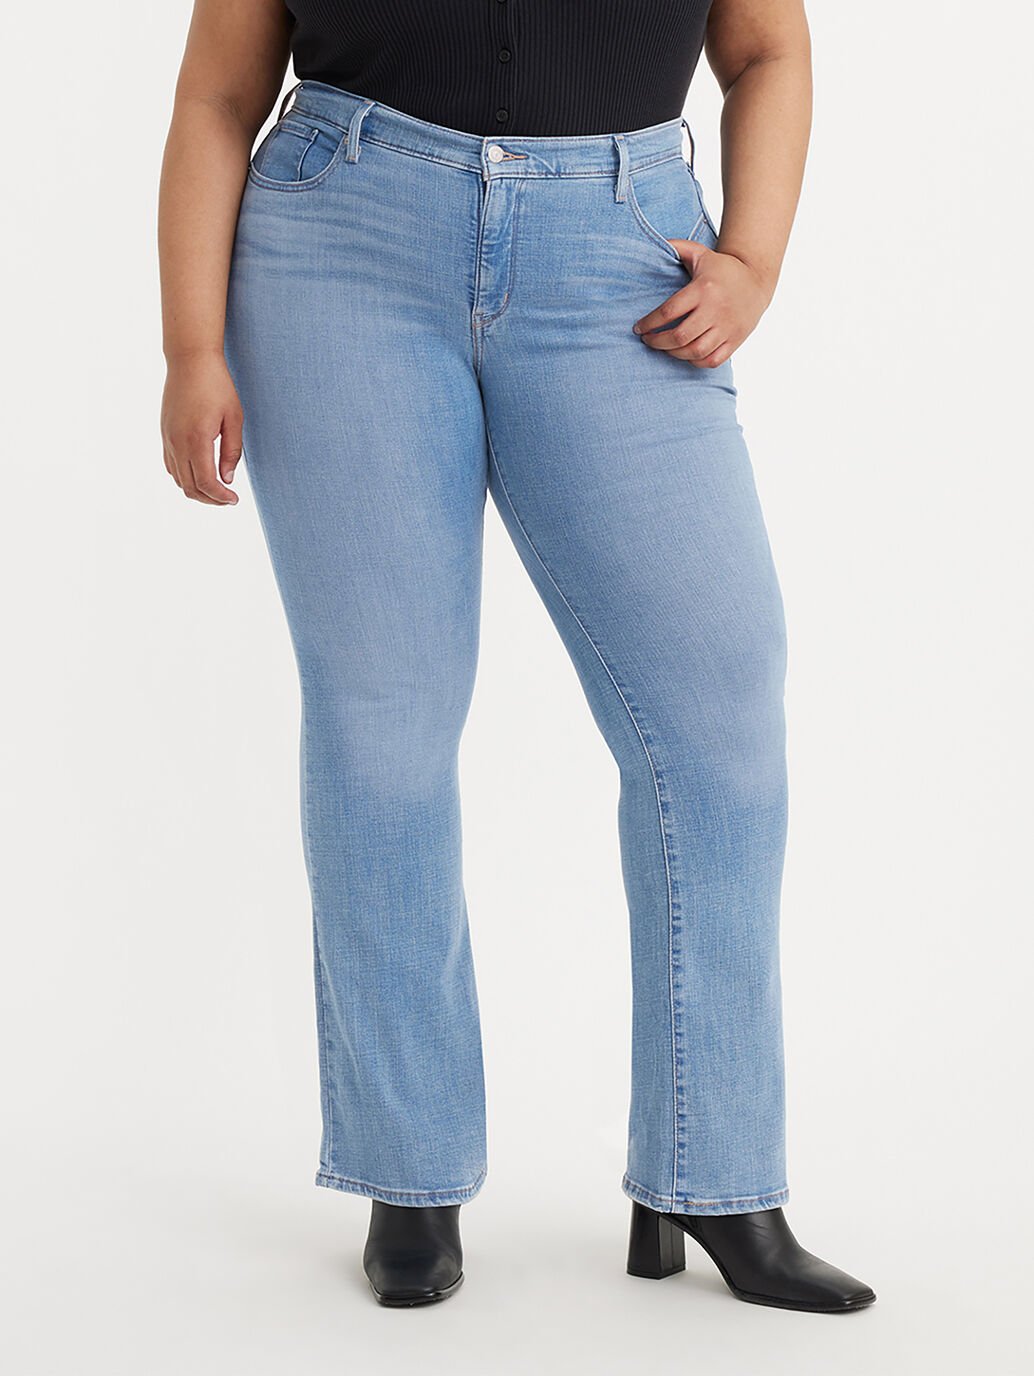 Levi’s® Women's 315 Shaping Bootcut Jeans